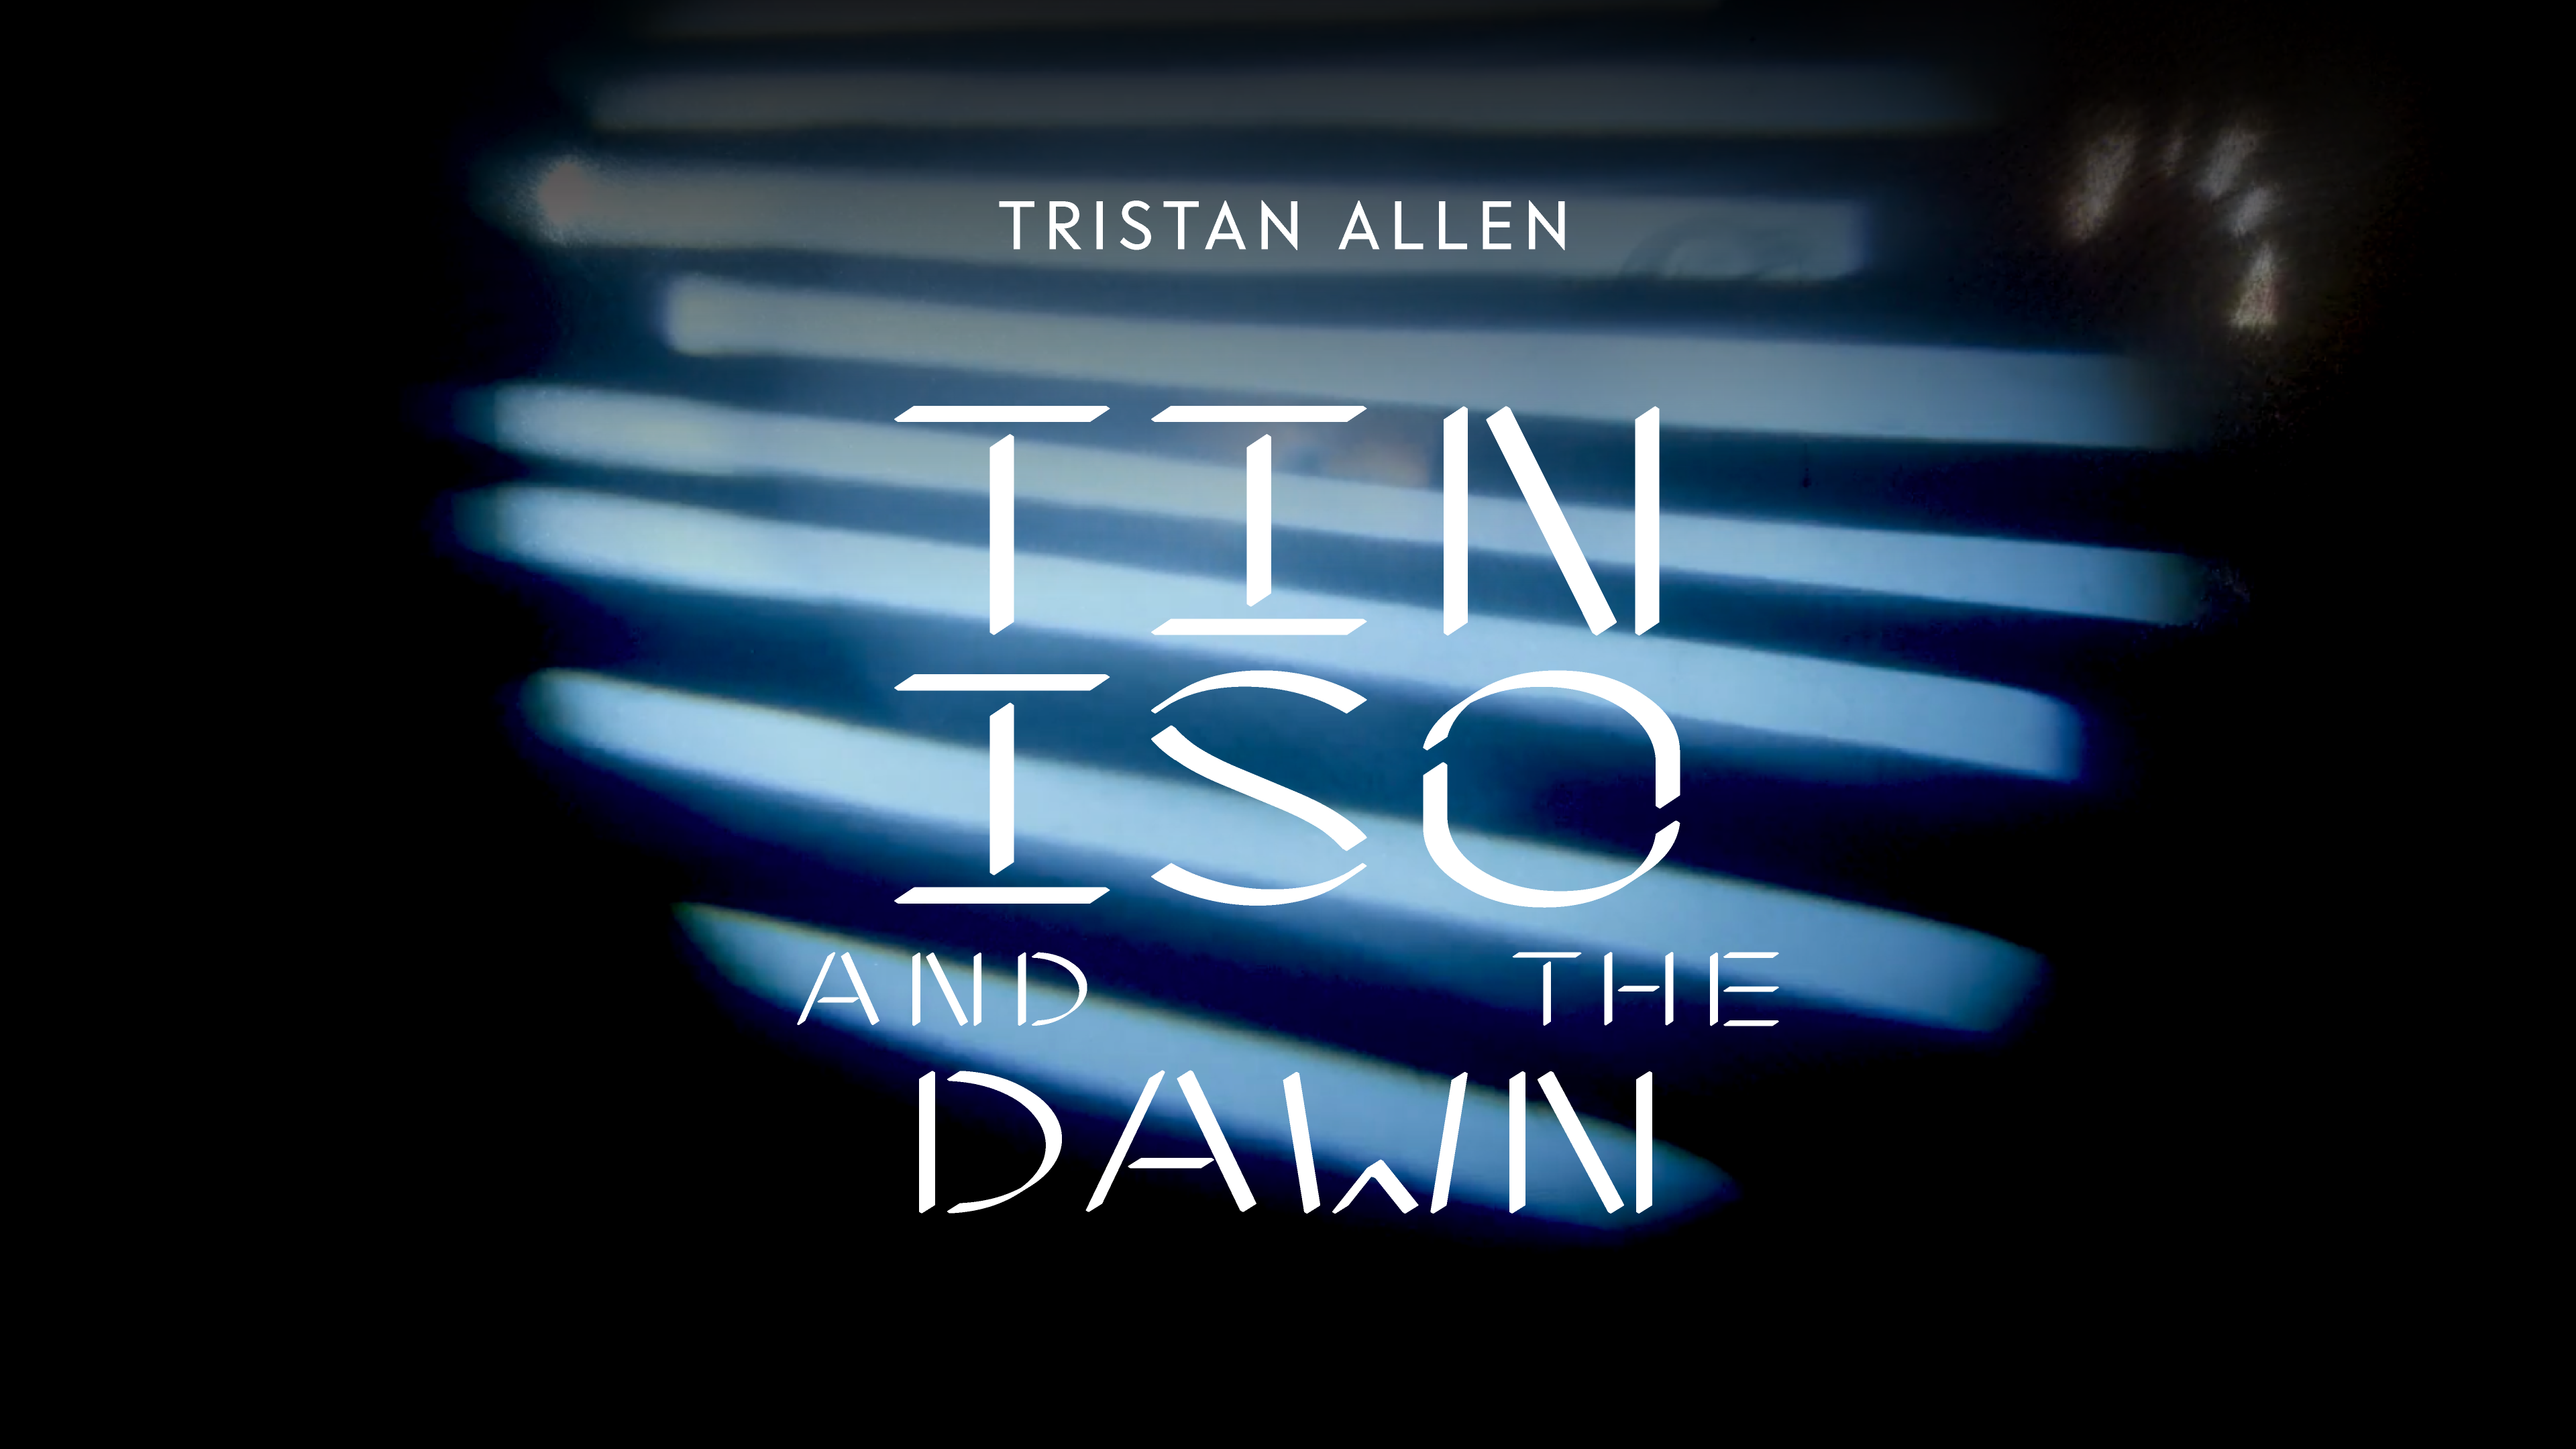 Link to Video for Tristan Allen – Tin Iso and the Dawn (A Portrait)